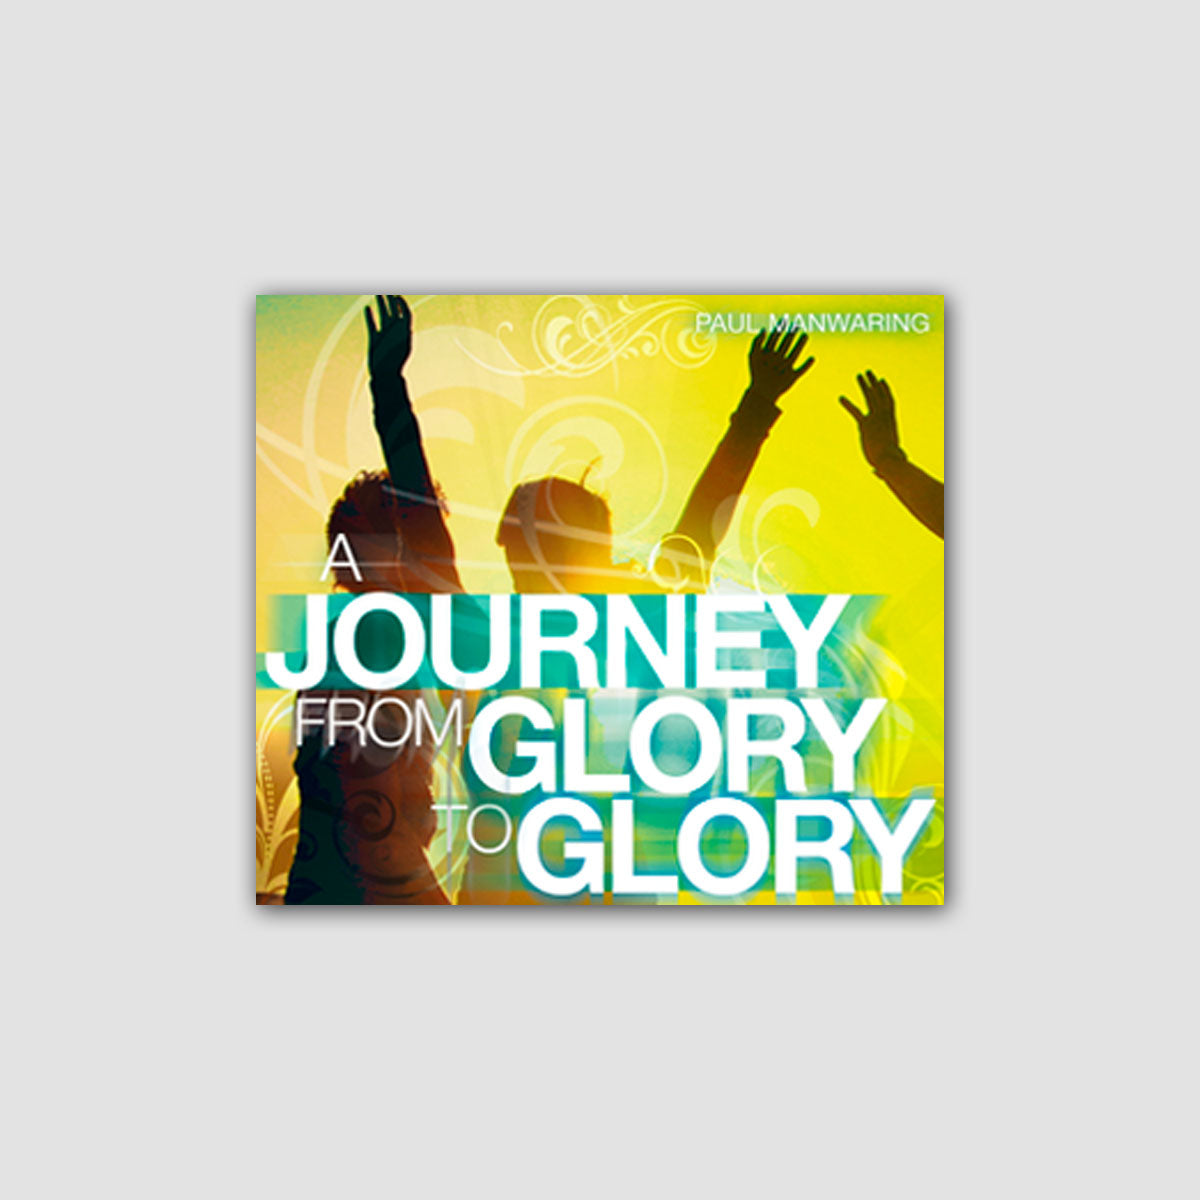 A Journey from Glory to Glory